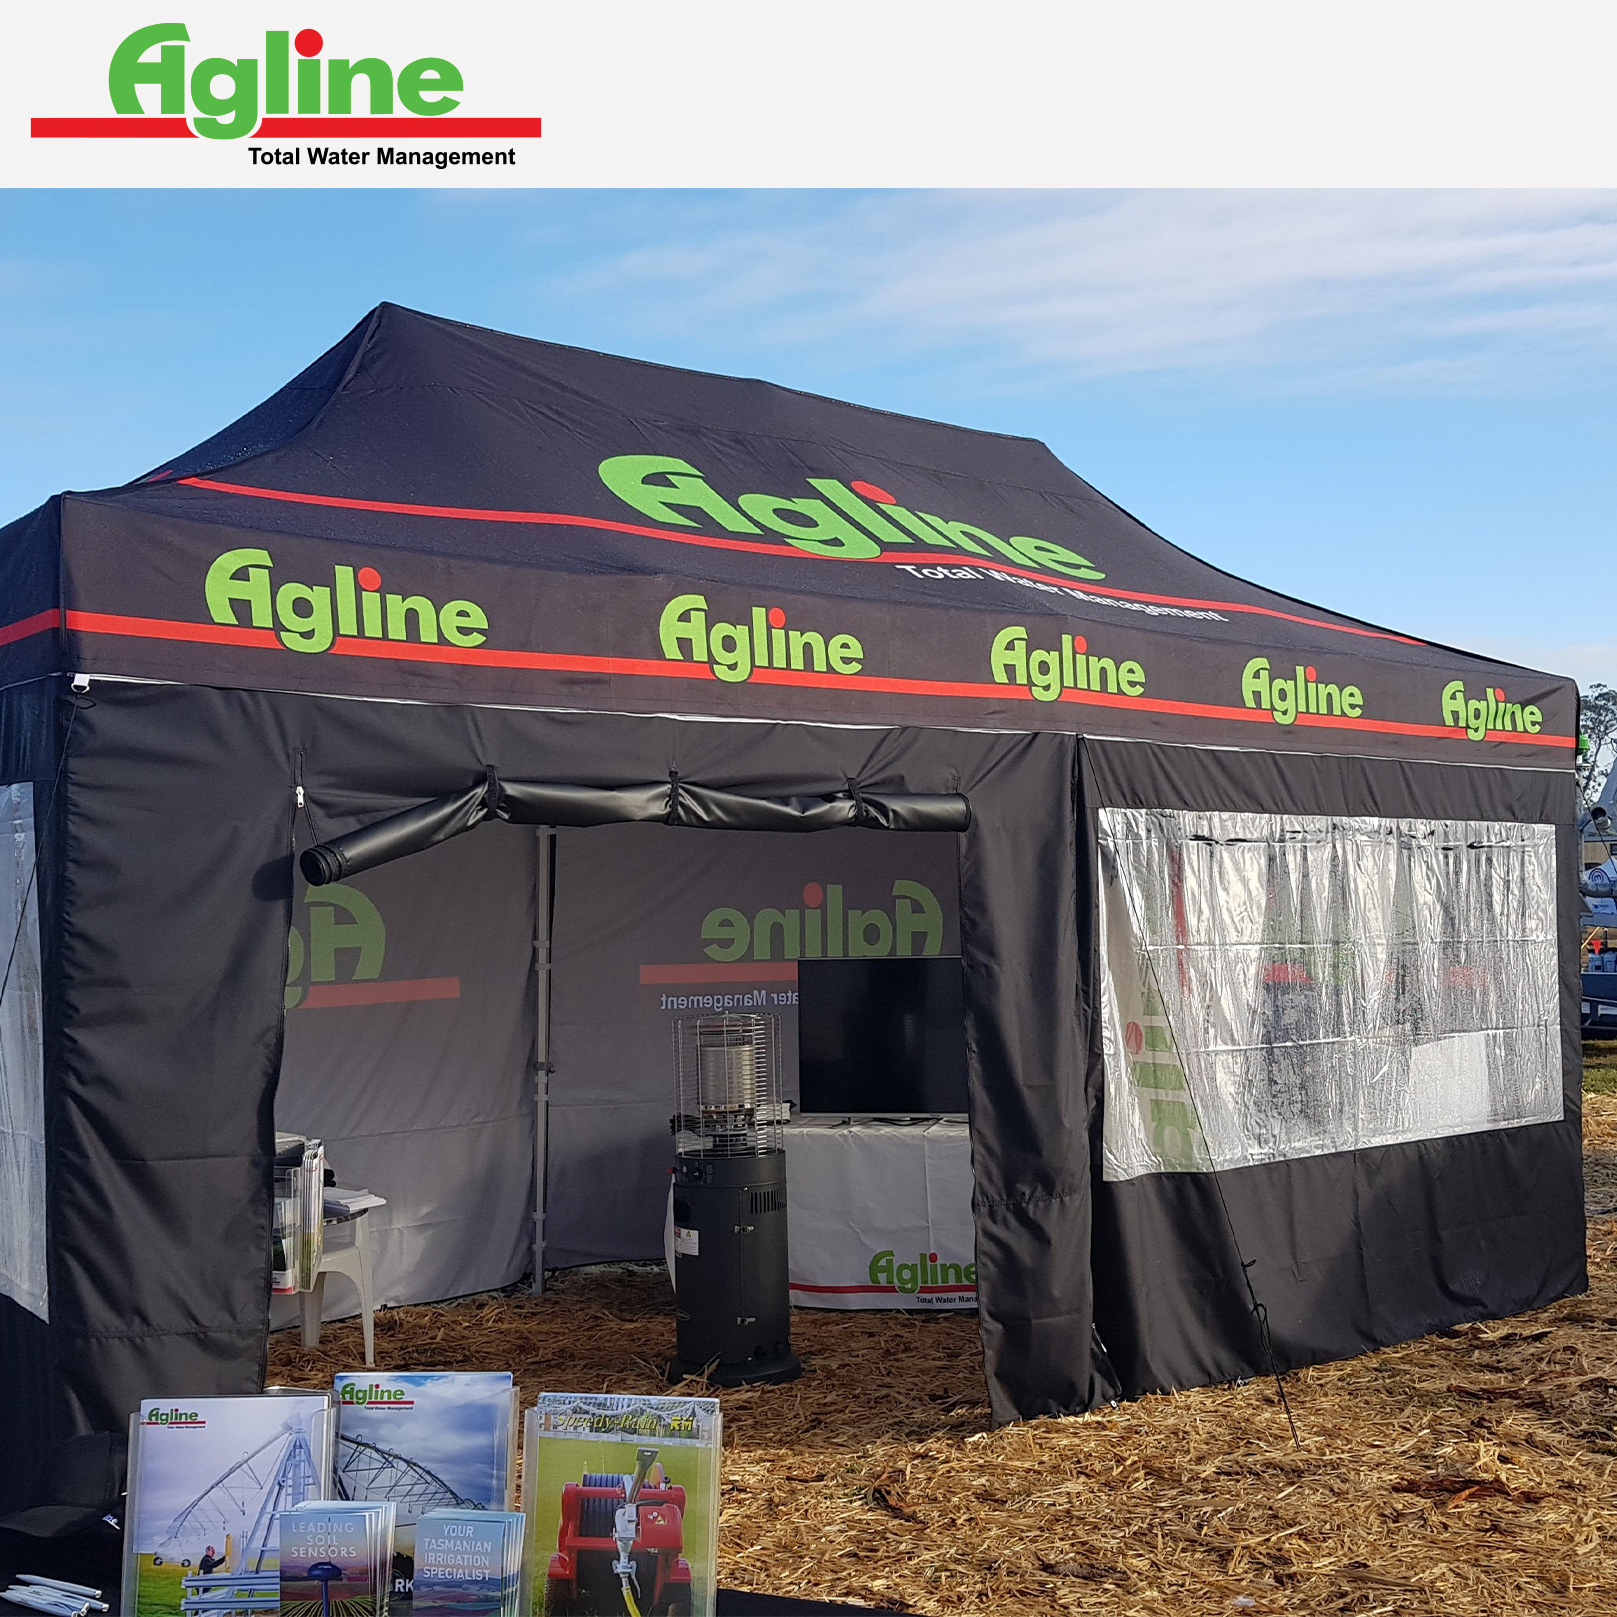 Agline tent at Agfest event